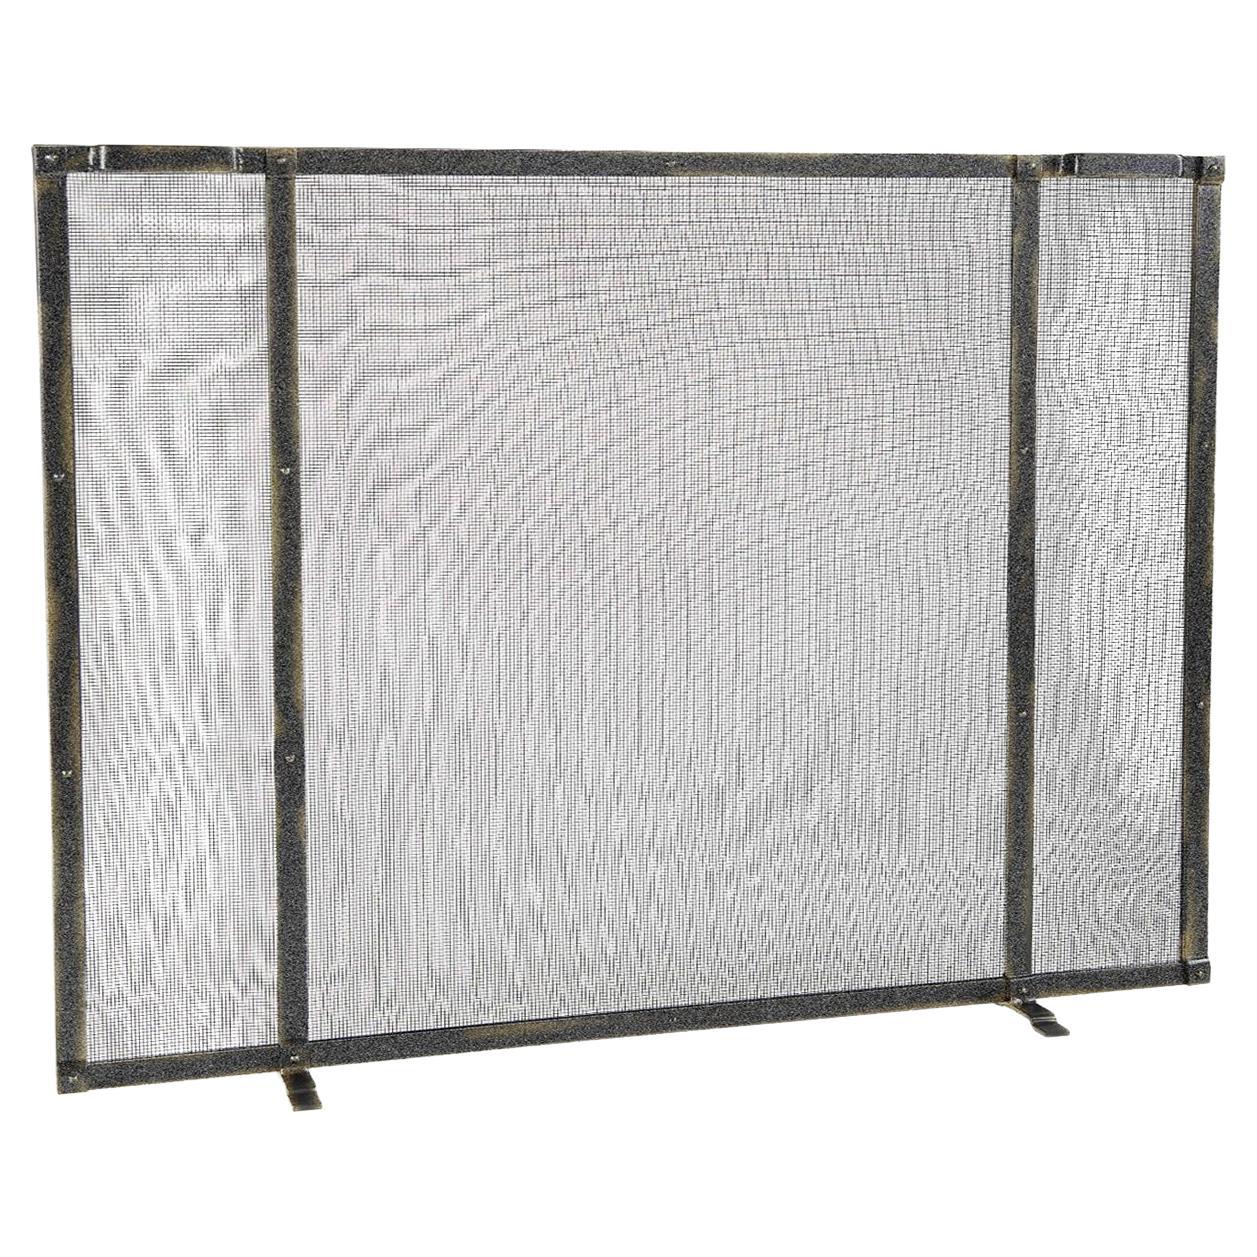 Gunnison Fireplace Screen in a Gold Rubbed Black Finish For Sale